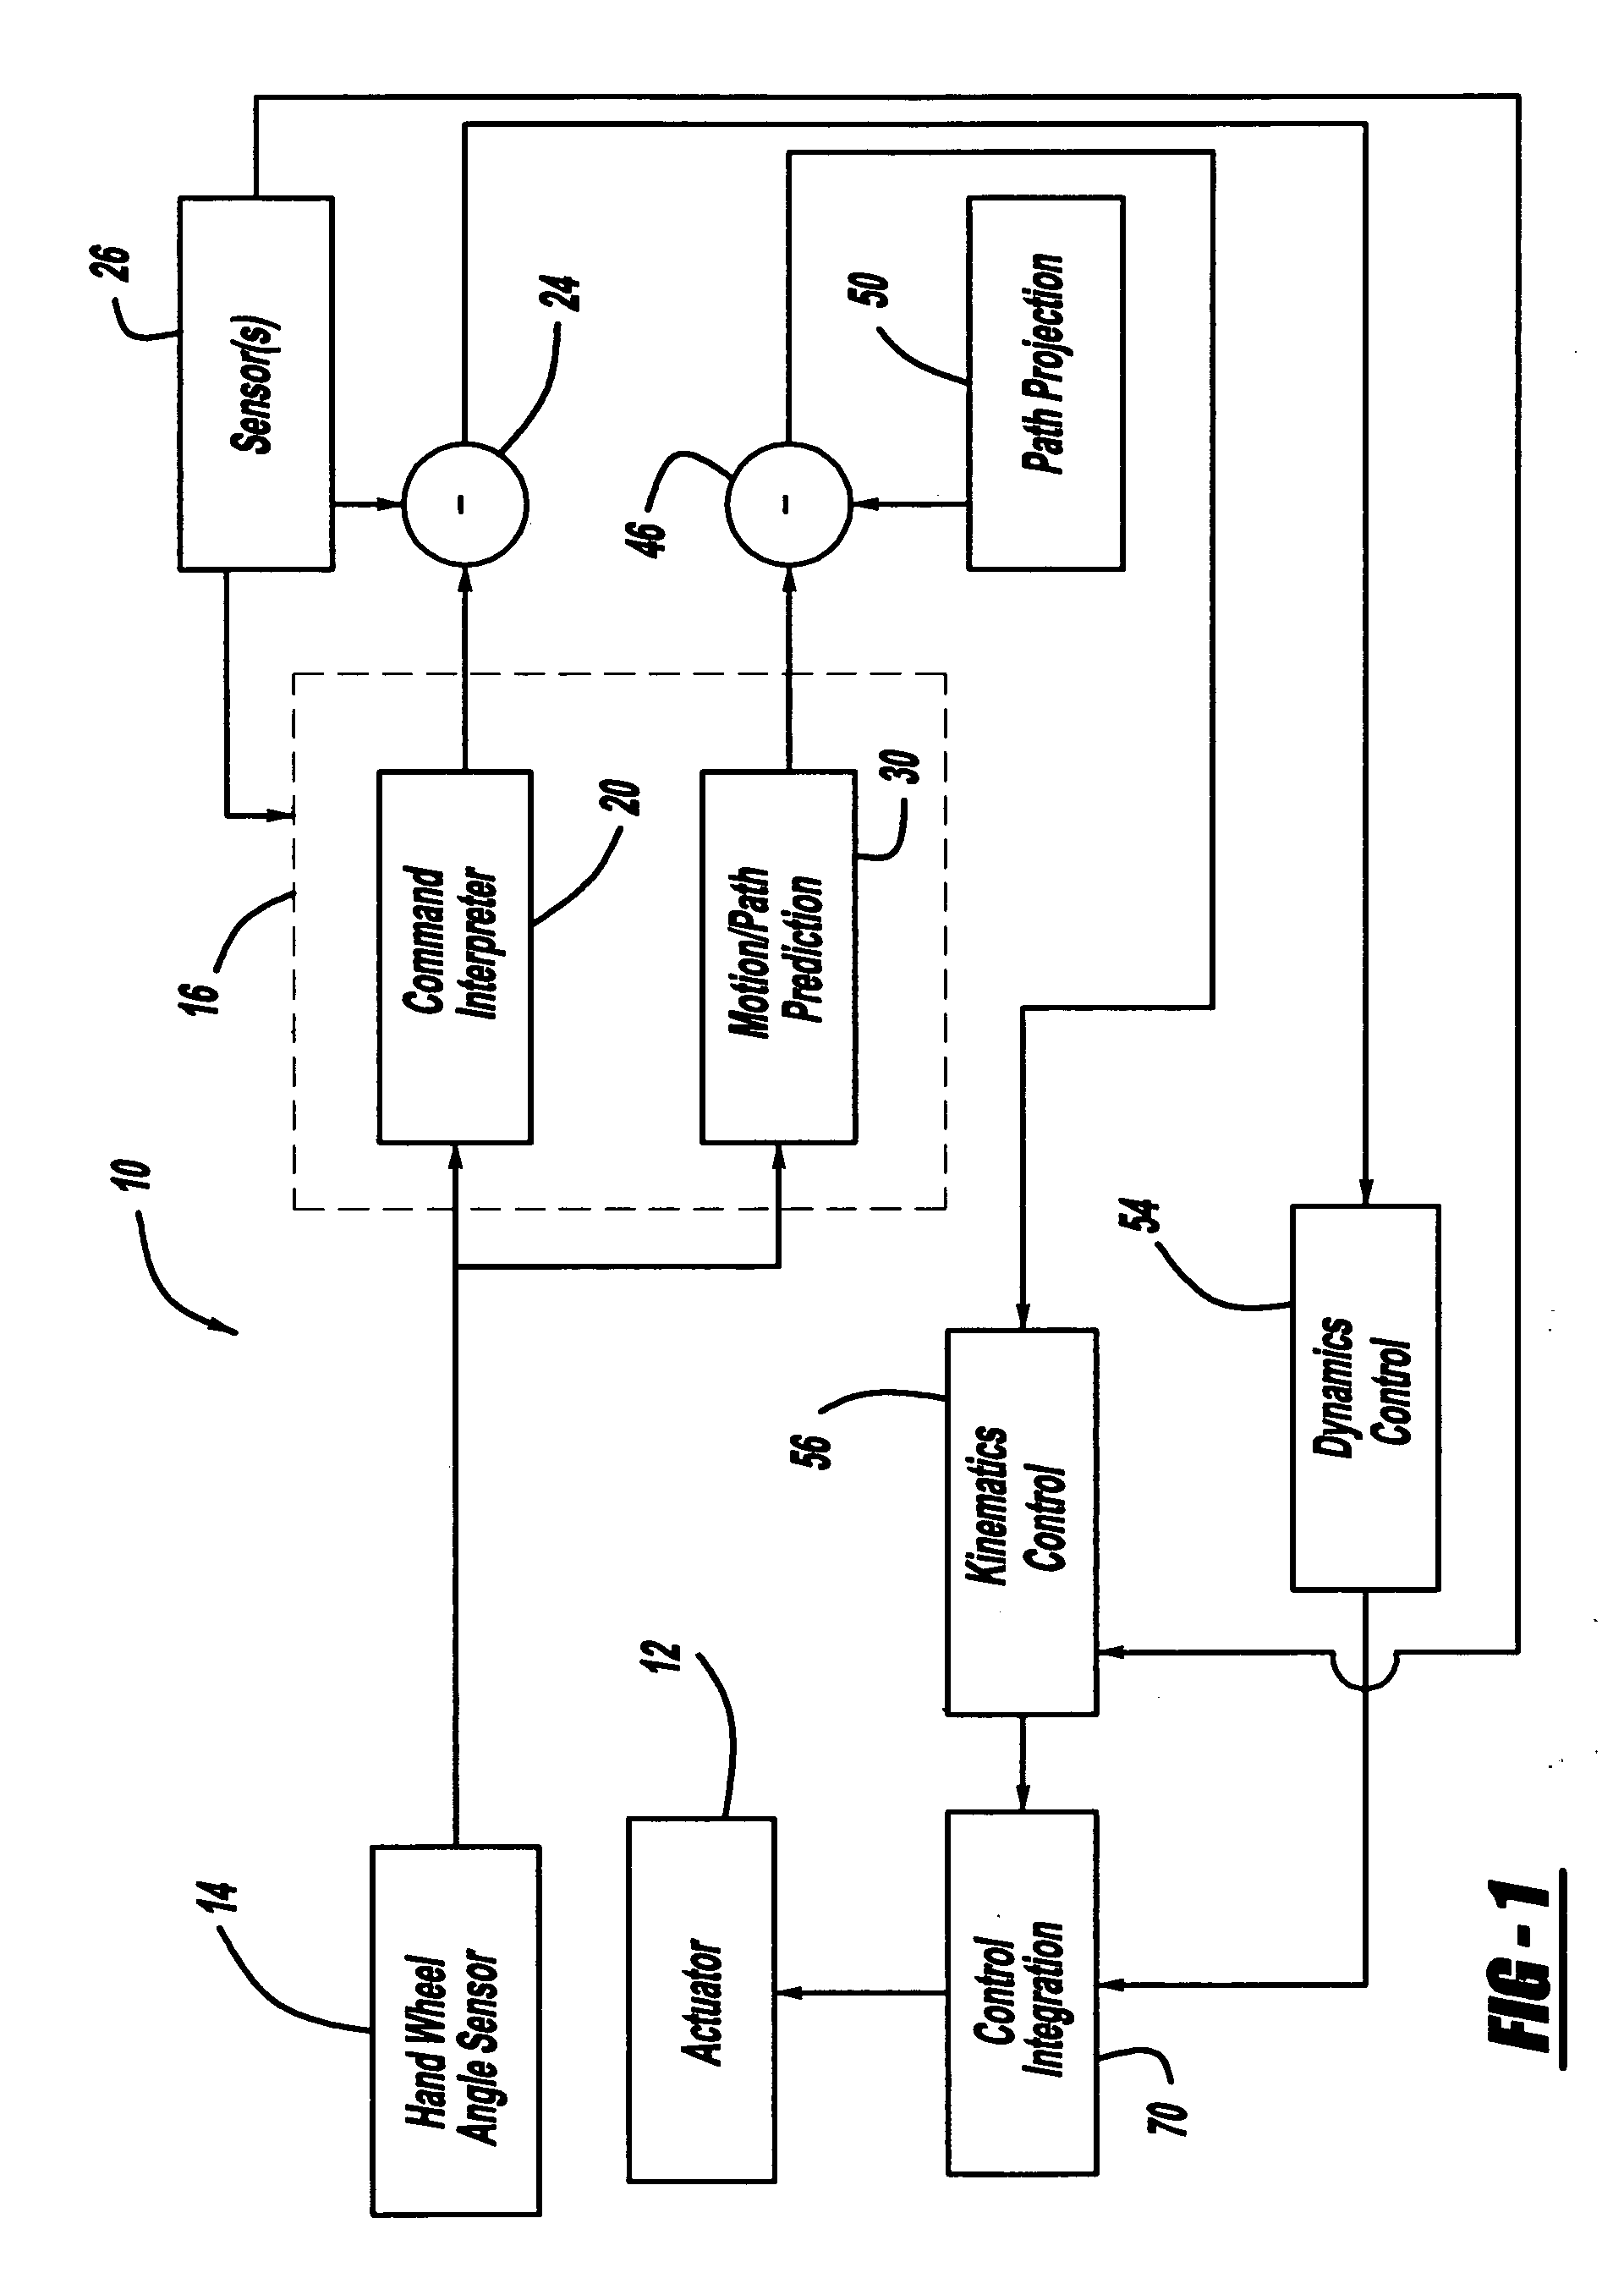 Method and apparatus for preview-based vehicle lateral control